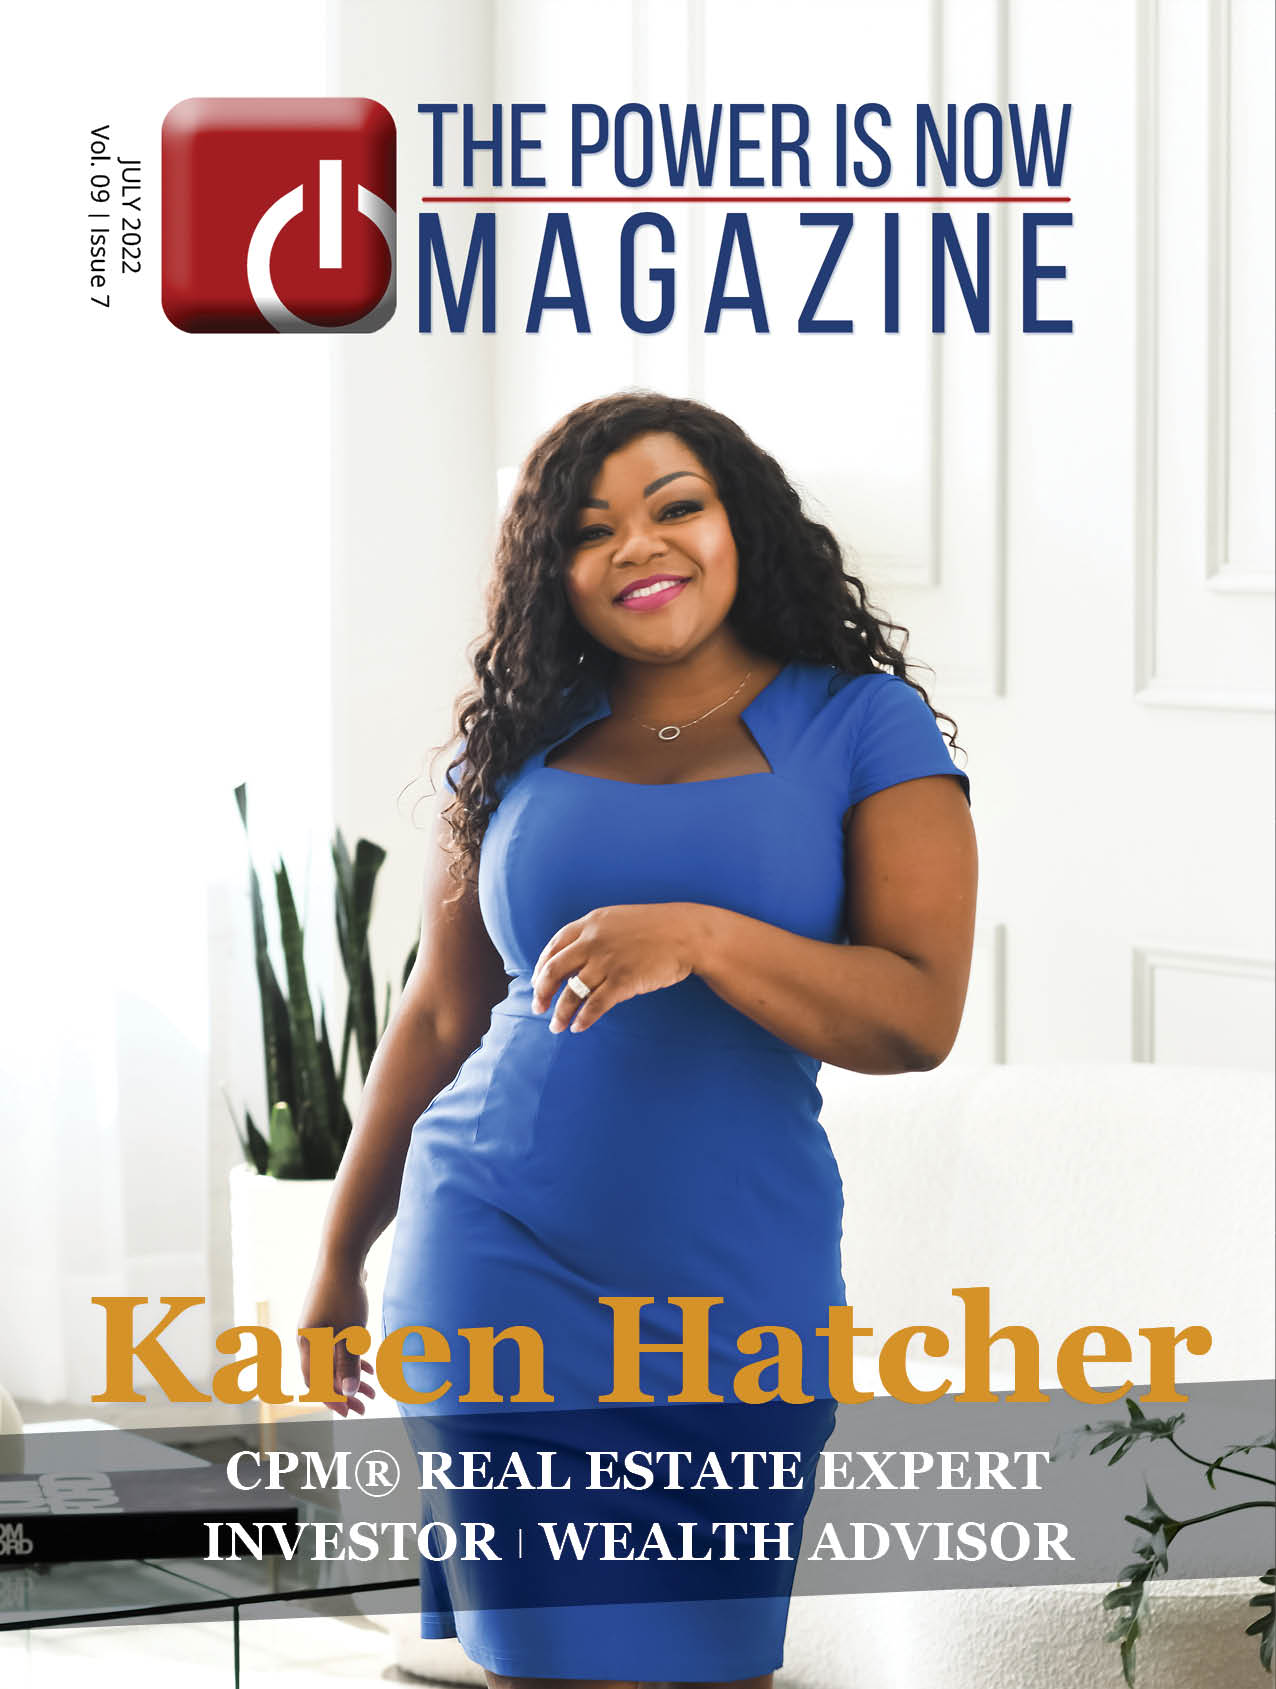 Karen Hatcher Cover and Feature of 'The Power is Now' Magazine